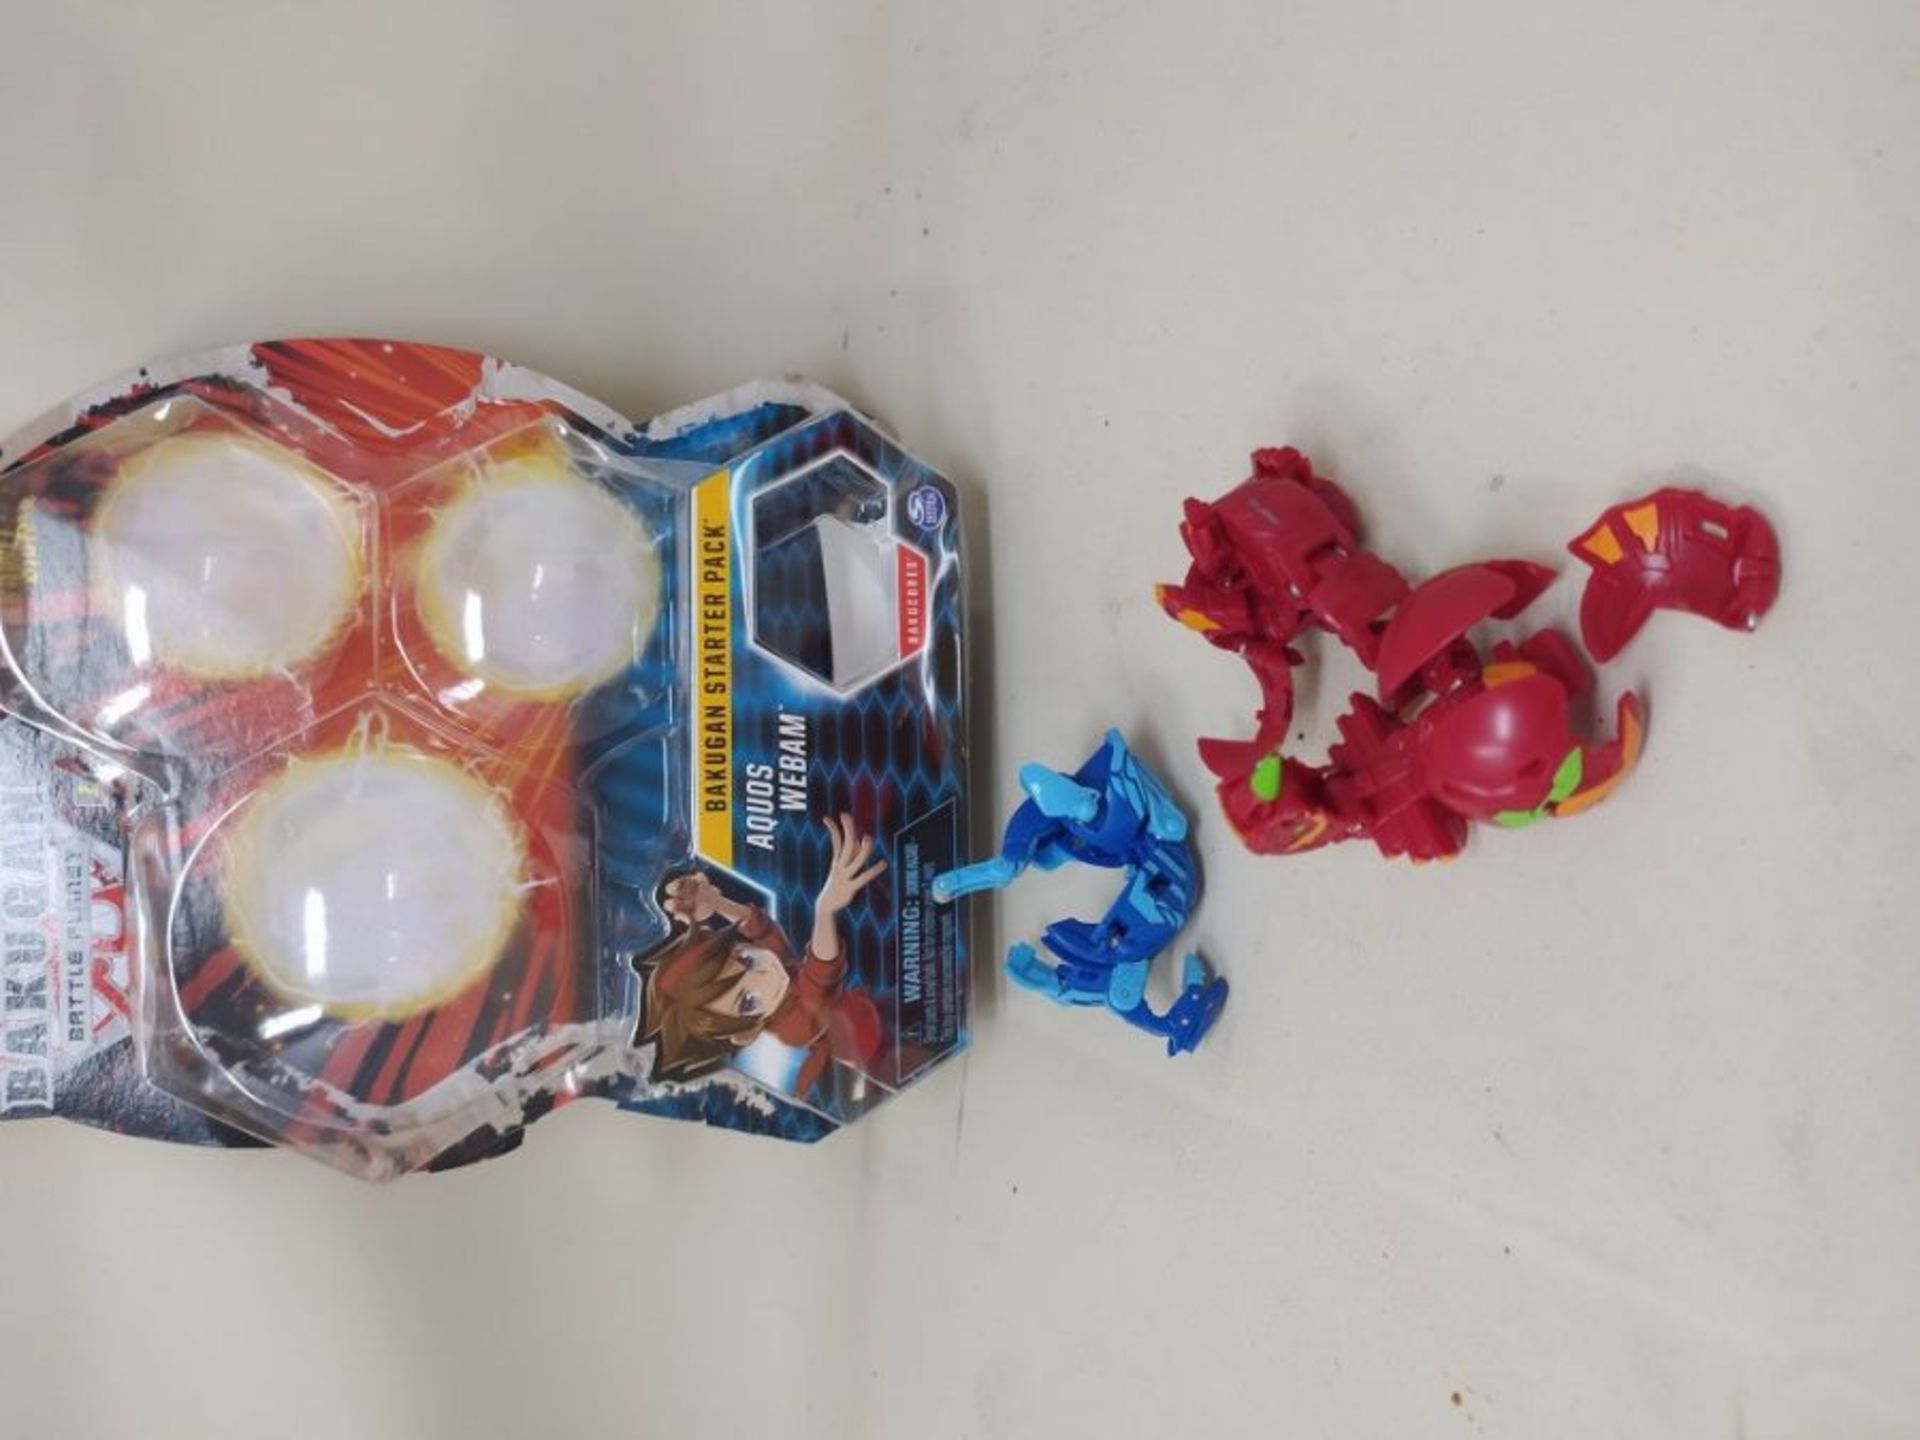 BAKUGAN 6045144 Starter Pack Set Assortment (Styles May Vary-One Supplied), Multi Colo - Image 2 of 2